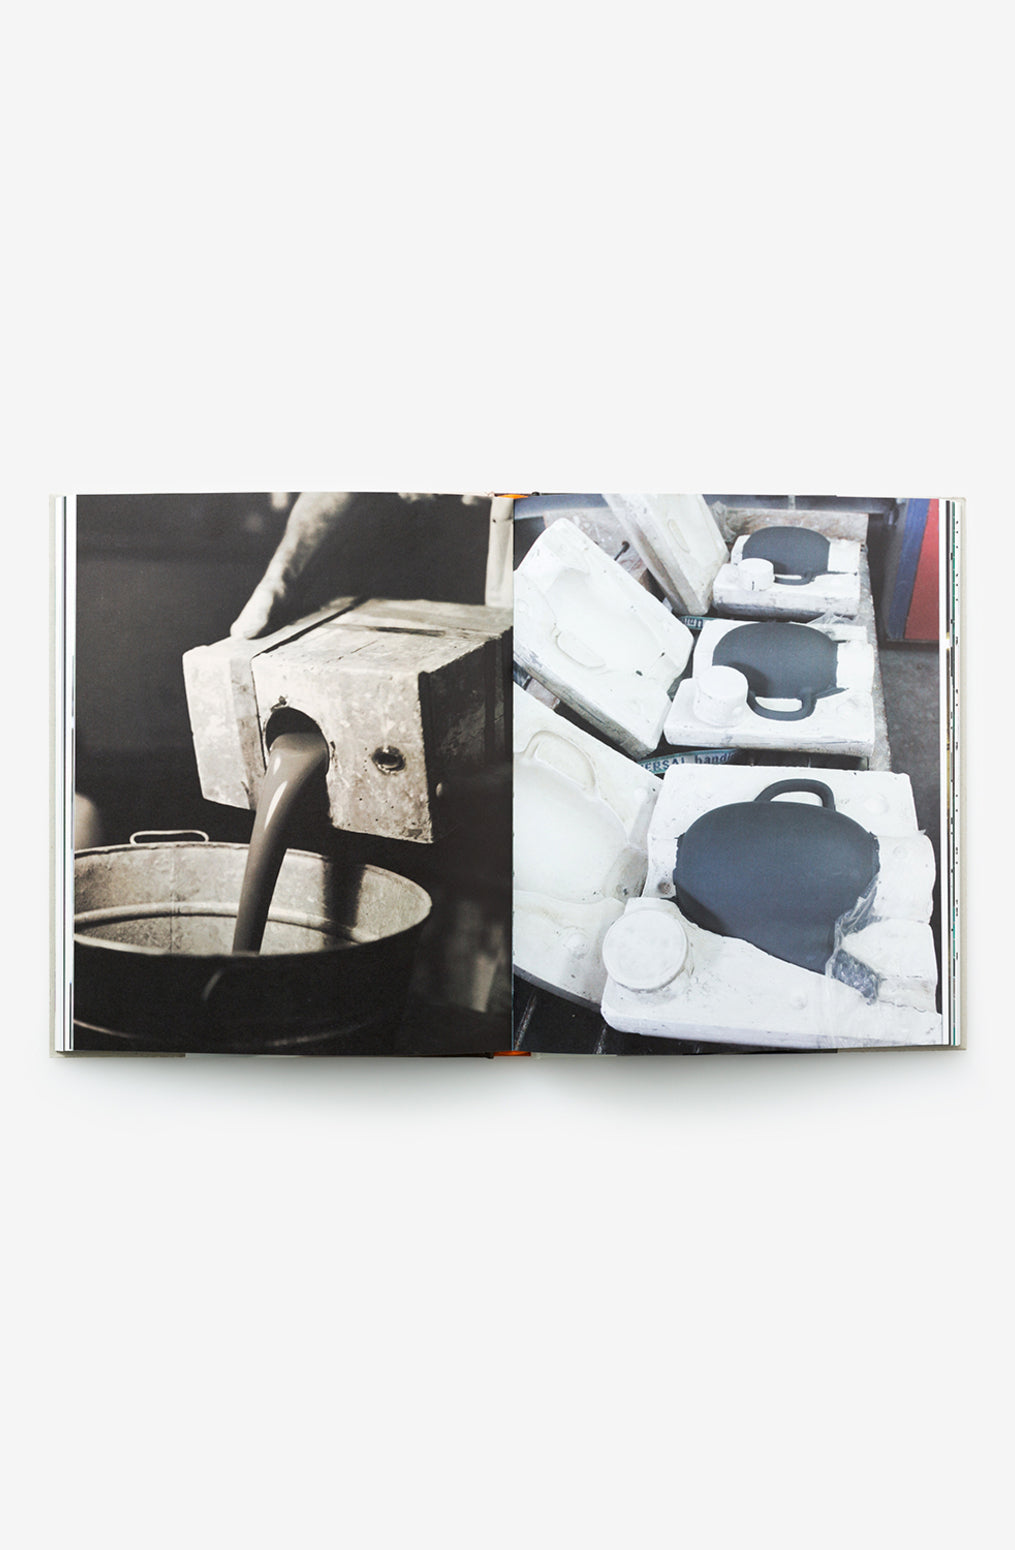 Alabama Chanin Heath Ceramics: The Complexity of Simplicity Book on Organic Hand-Made Pottery 